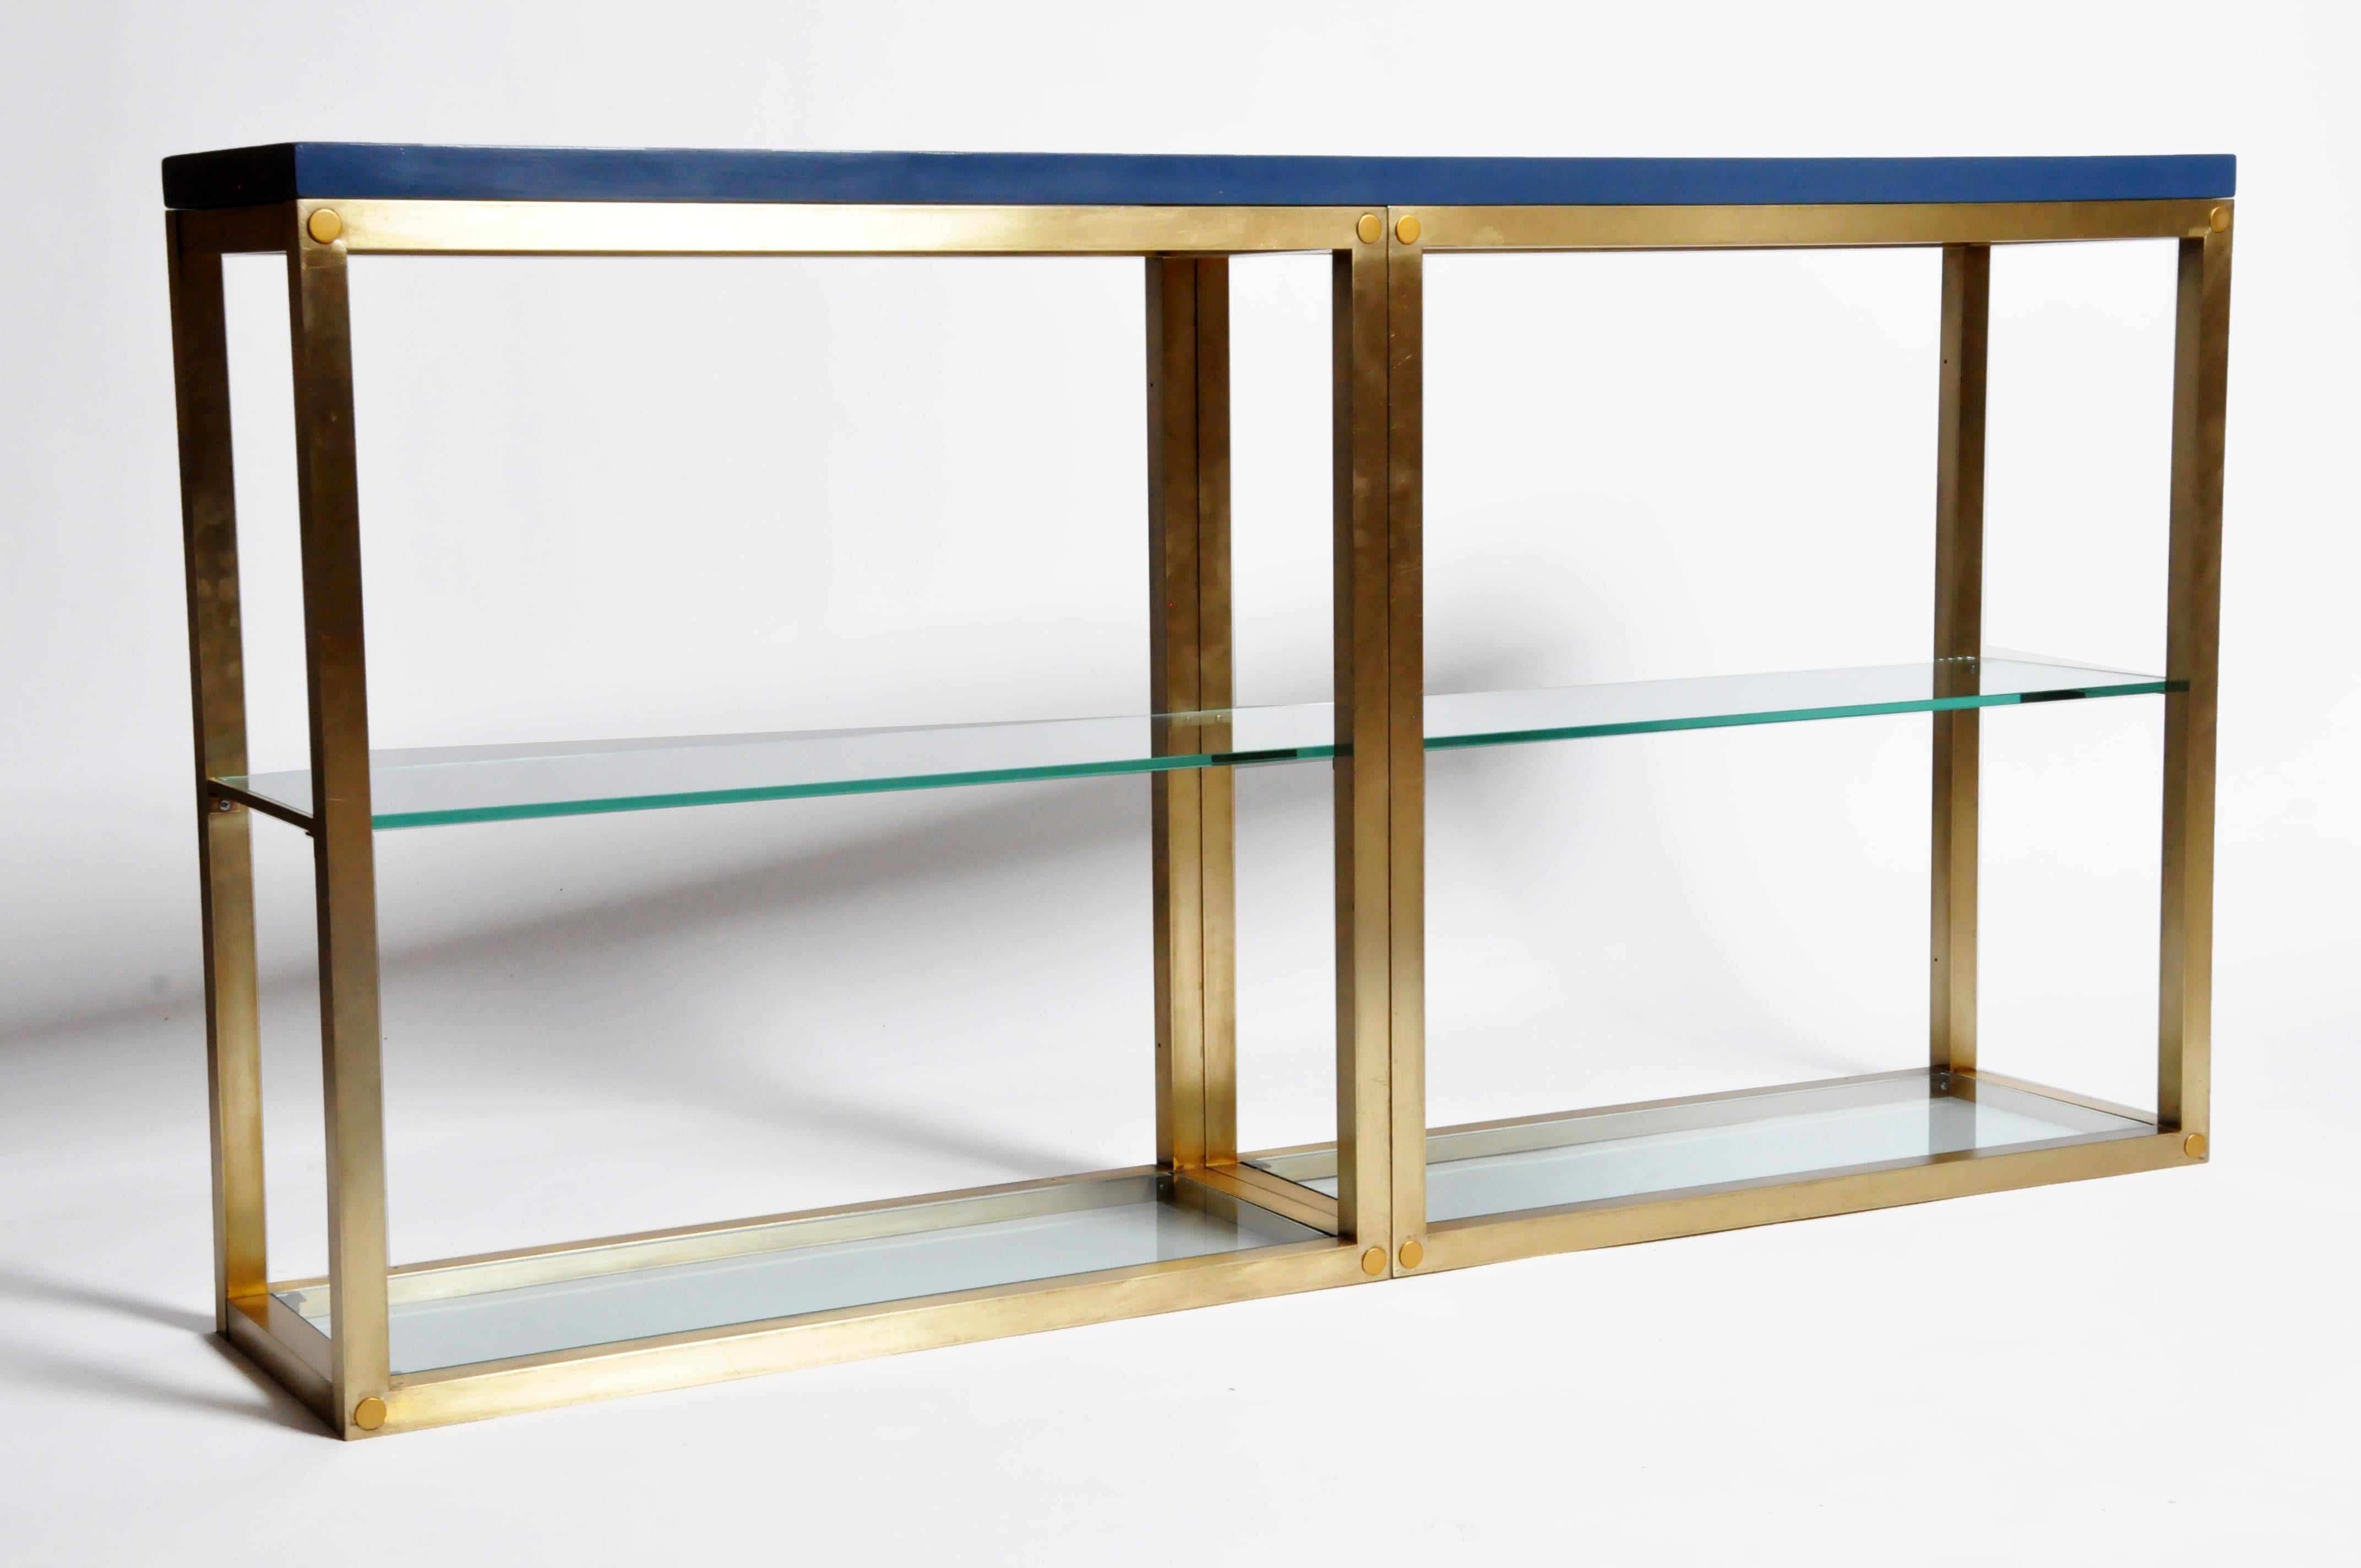 This 1960s vintage French brass base was mated to newly-fabricated lacquered wood top and glass shelves. Beautiful addition to add a pop of color to any room in your home.